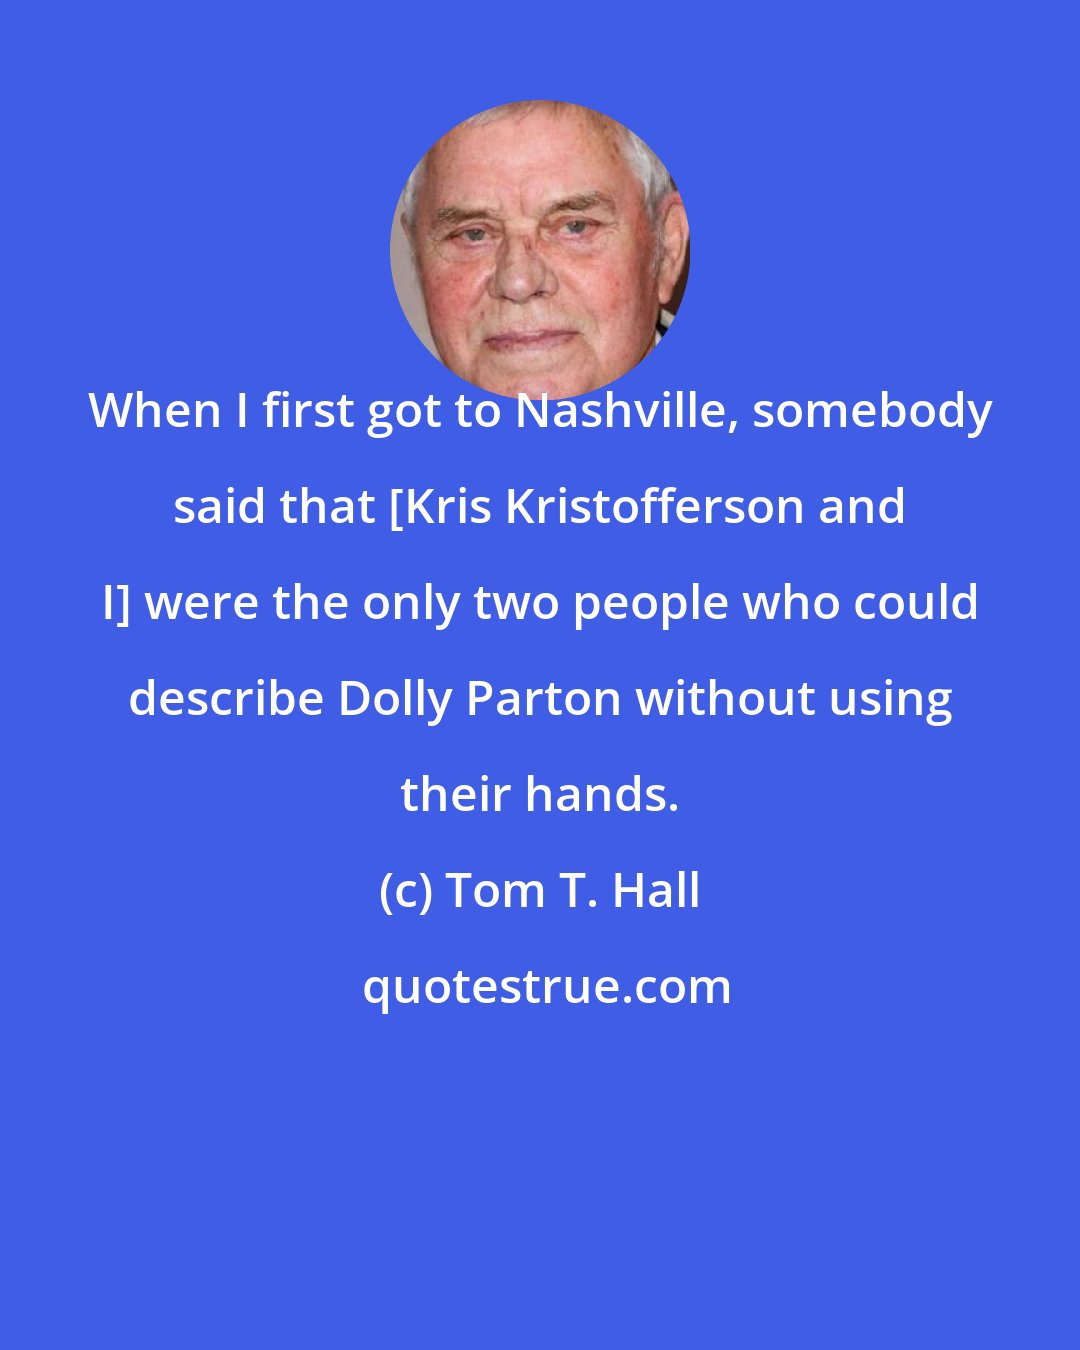 Tom T. Hall: When I first got to Nashville, somebody said that [Kris Kristofferson and I] were the only two people who could describe Dolly Parton without using their hands.